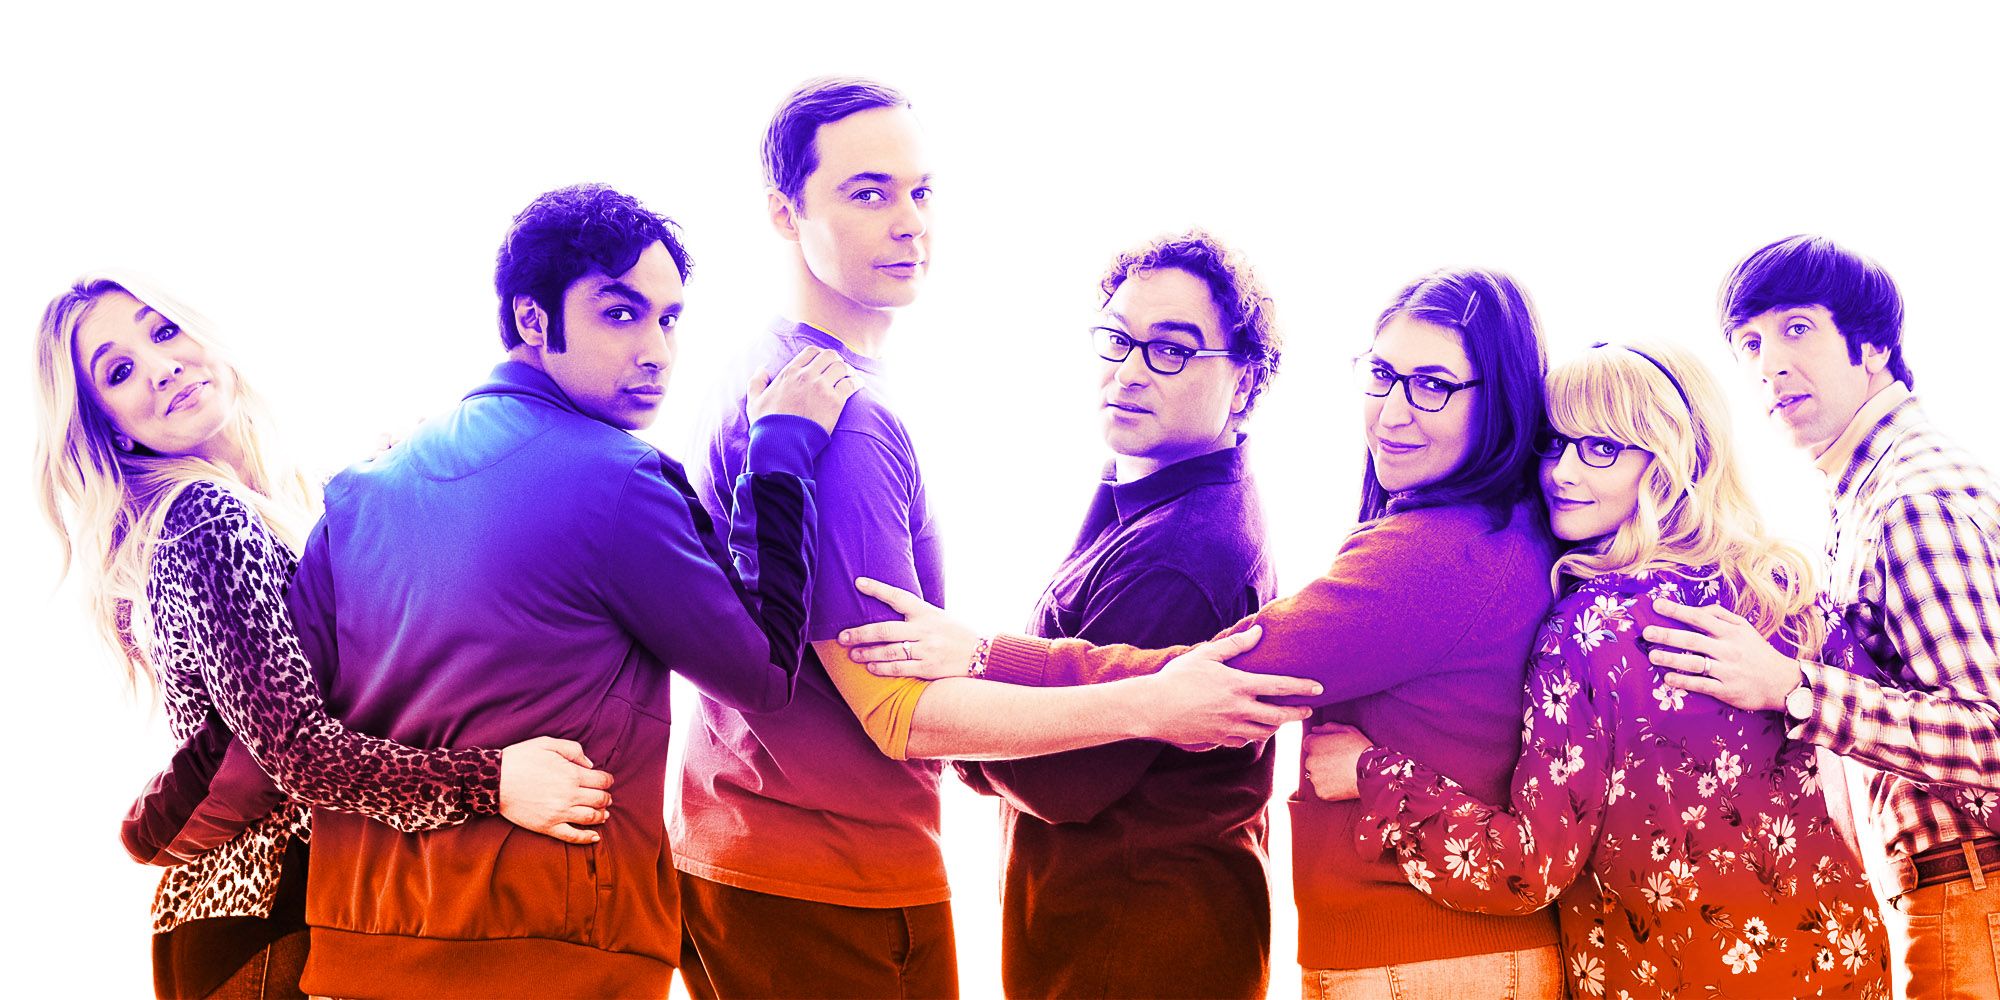 Why The Big Bang Theory Ended After Season 12 (Was It Canceled?)